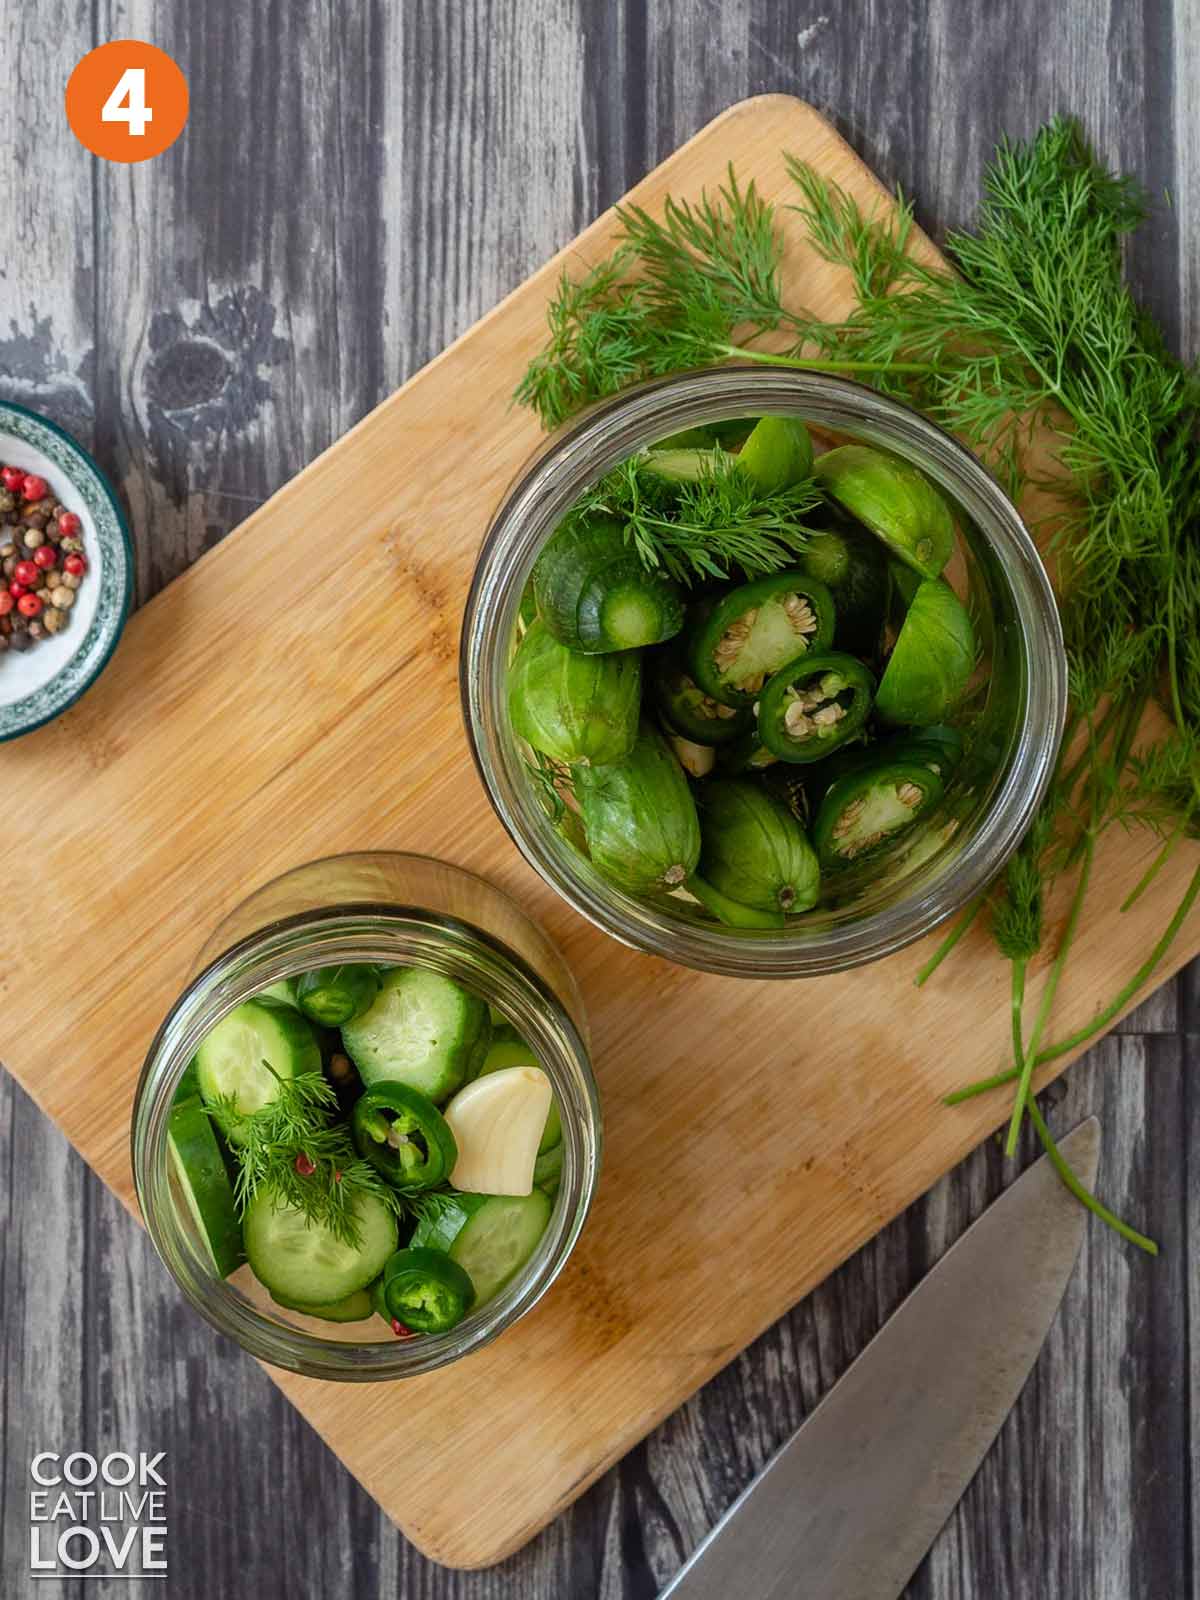 Cucumbers and other ingredients in jars.